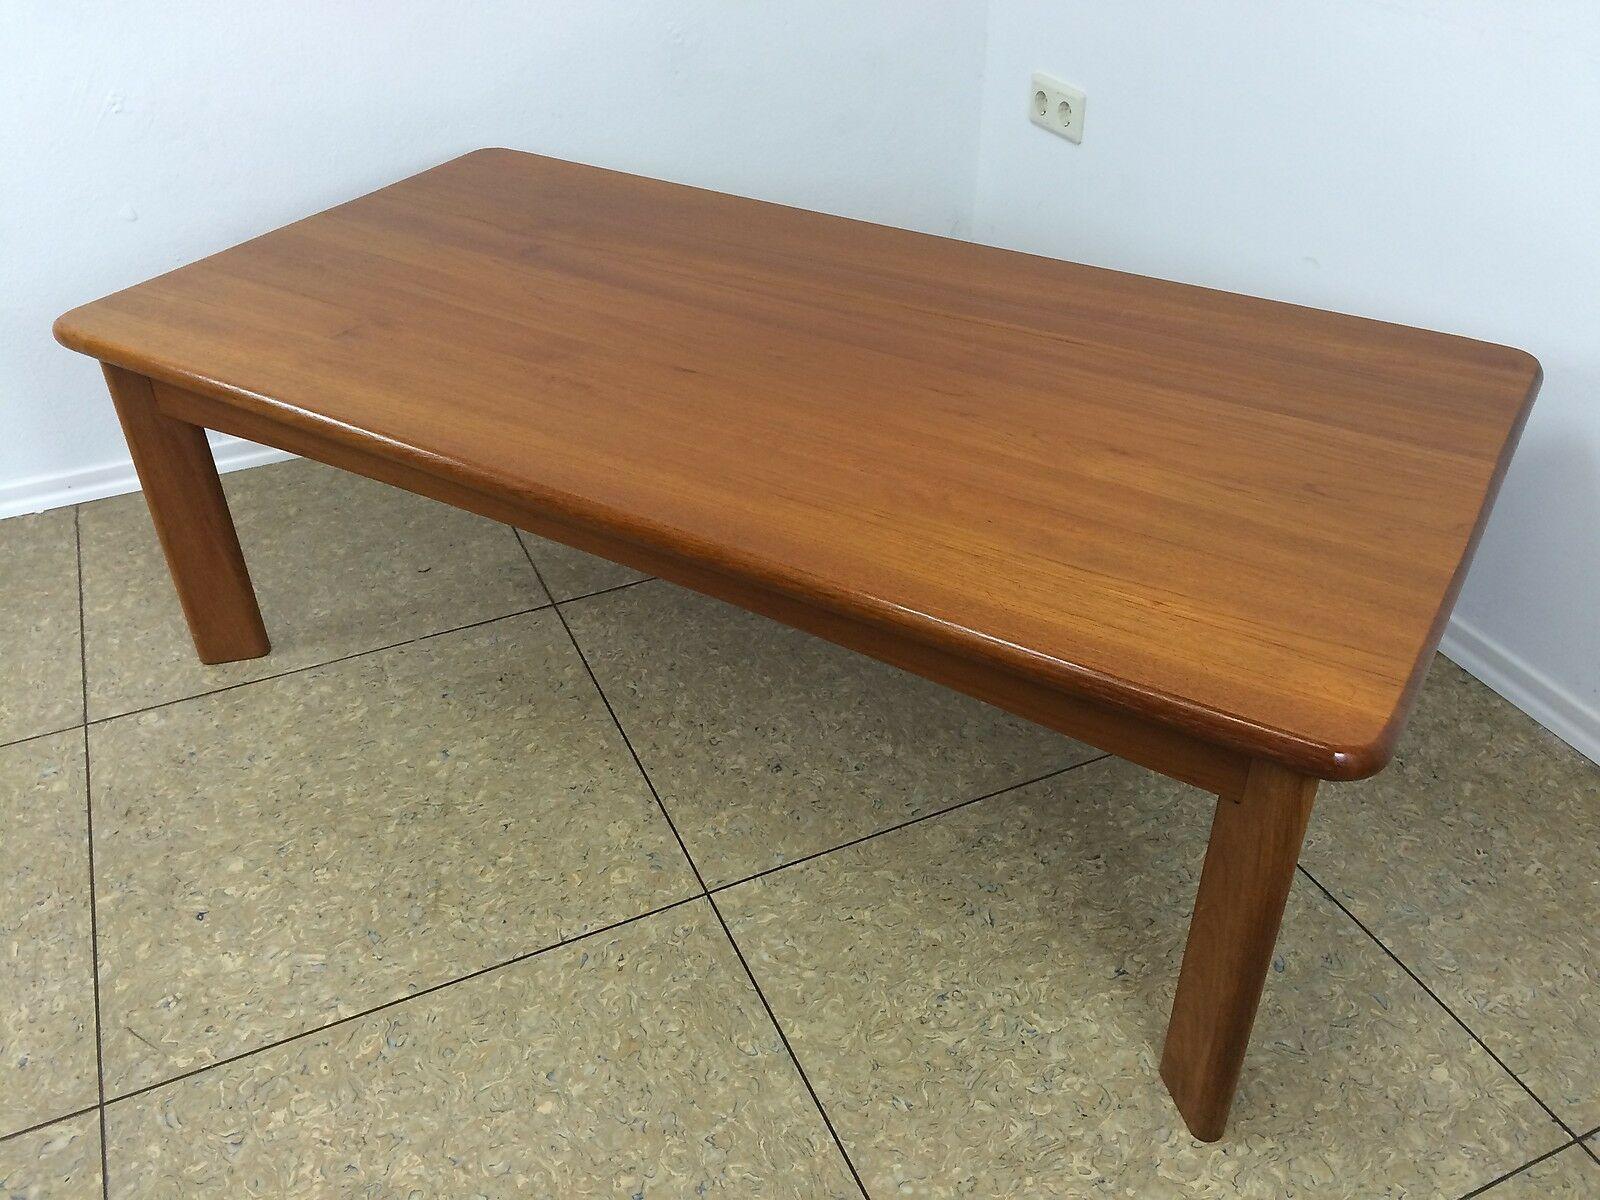 70s teak coffee table coffee table Danish Design Denmark mid century

Object: coffee table

Manufacturer:

Condition: good

Age: around 1960-1970

Dimensions:

148cm x 75cm x 49cm

Other notes:

The pictures serve as part of the